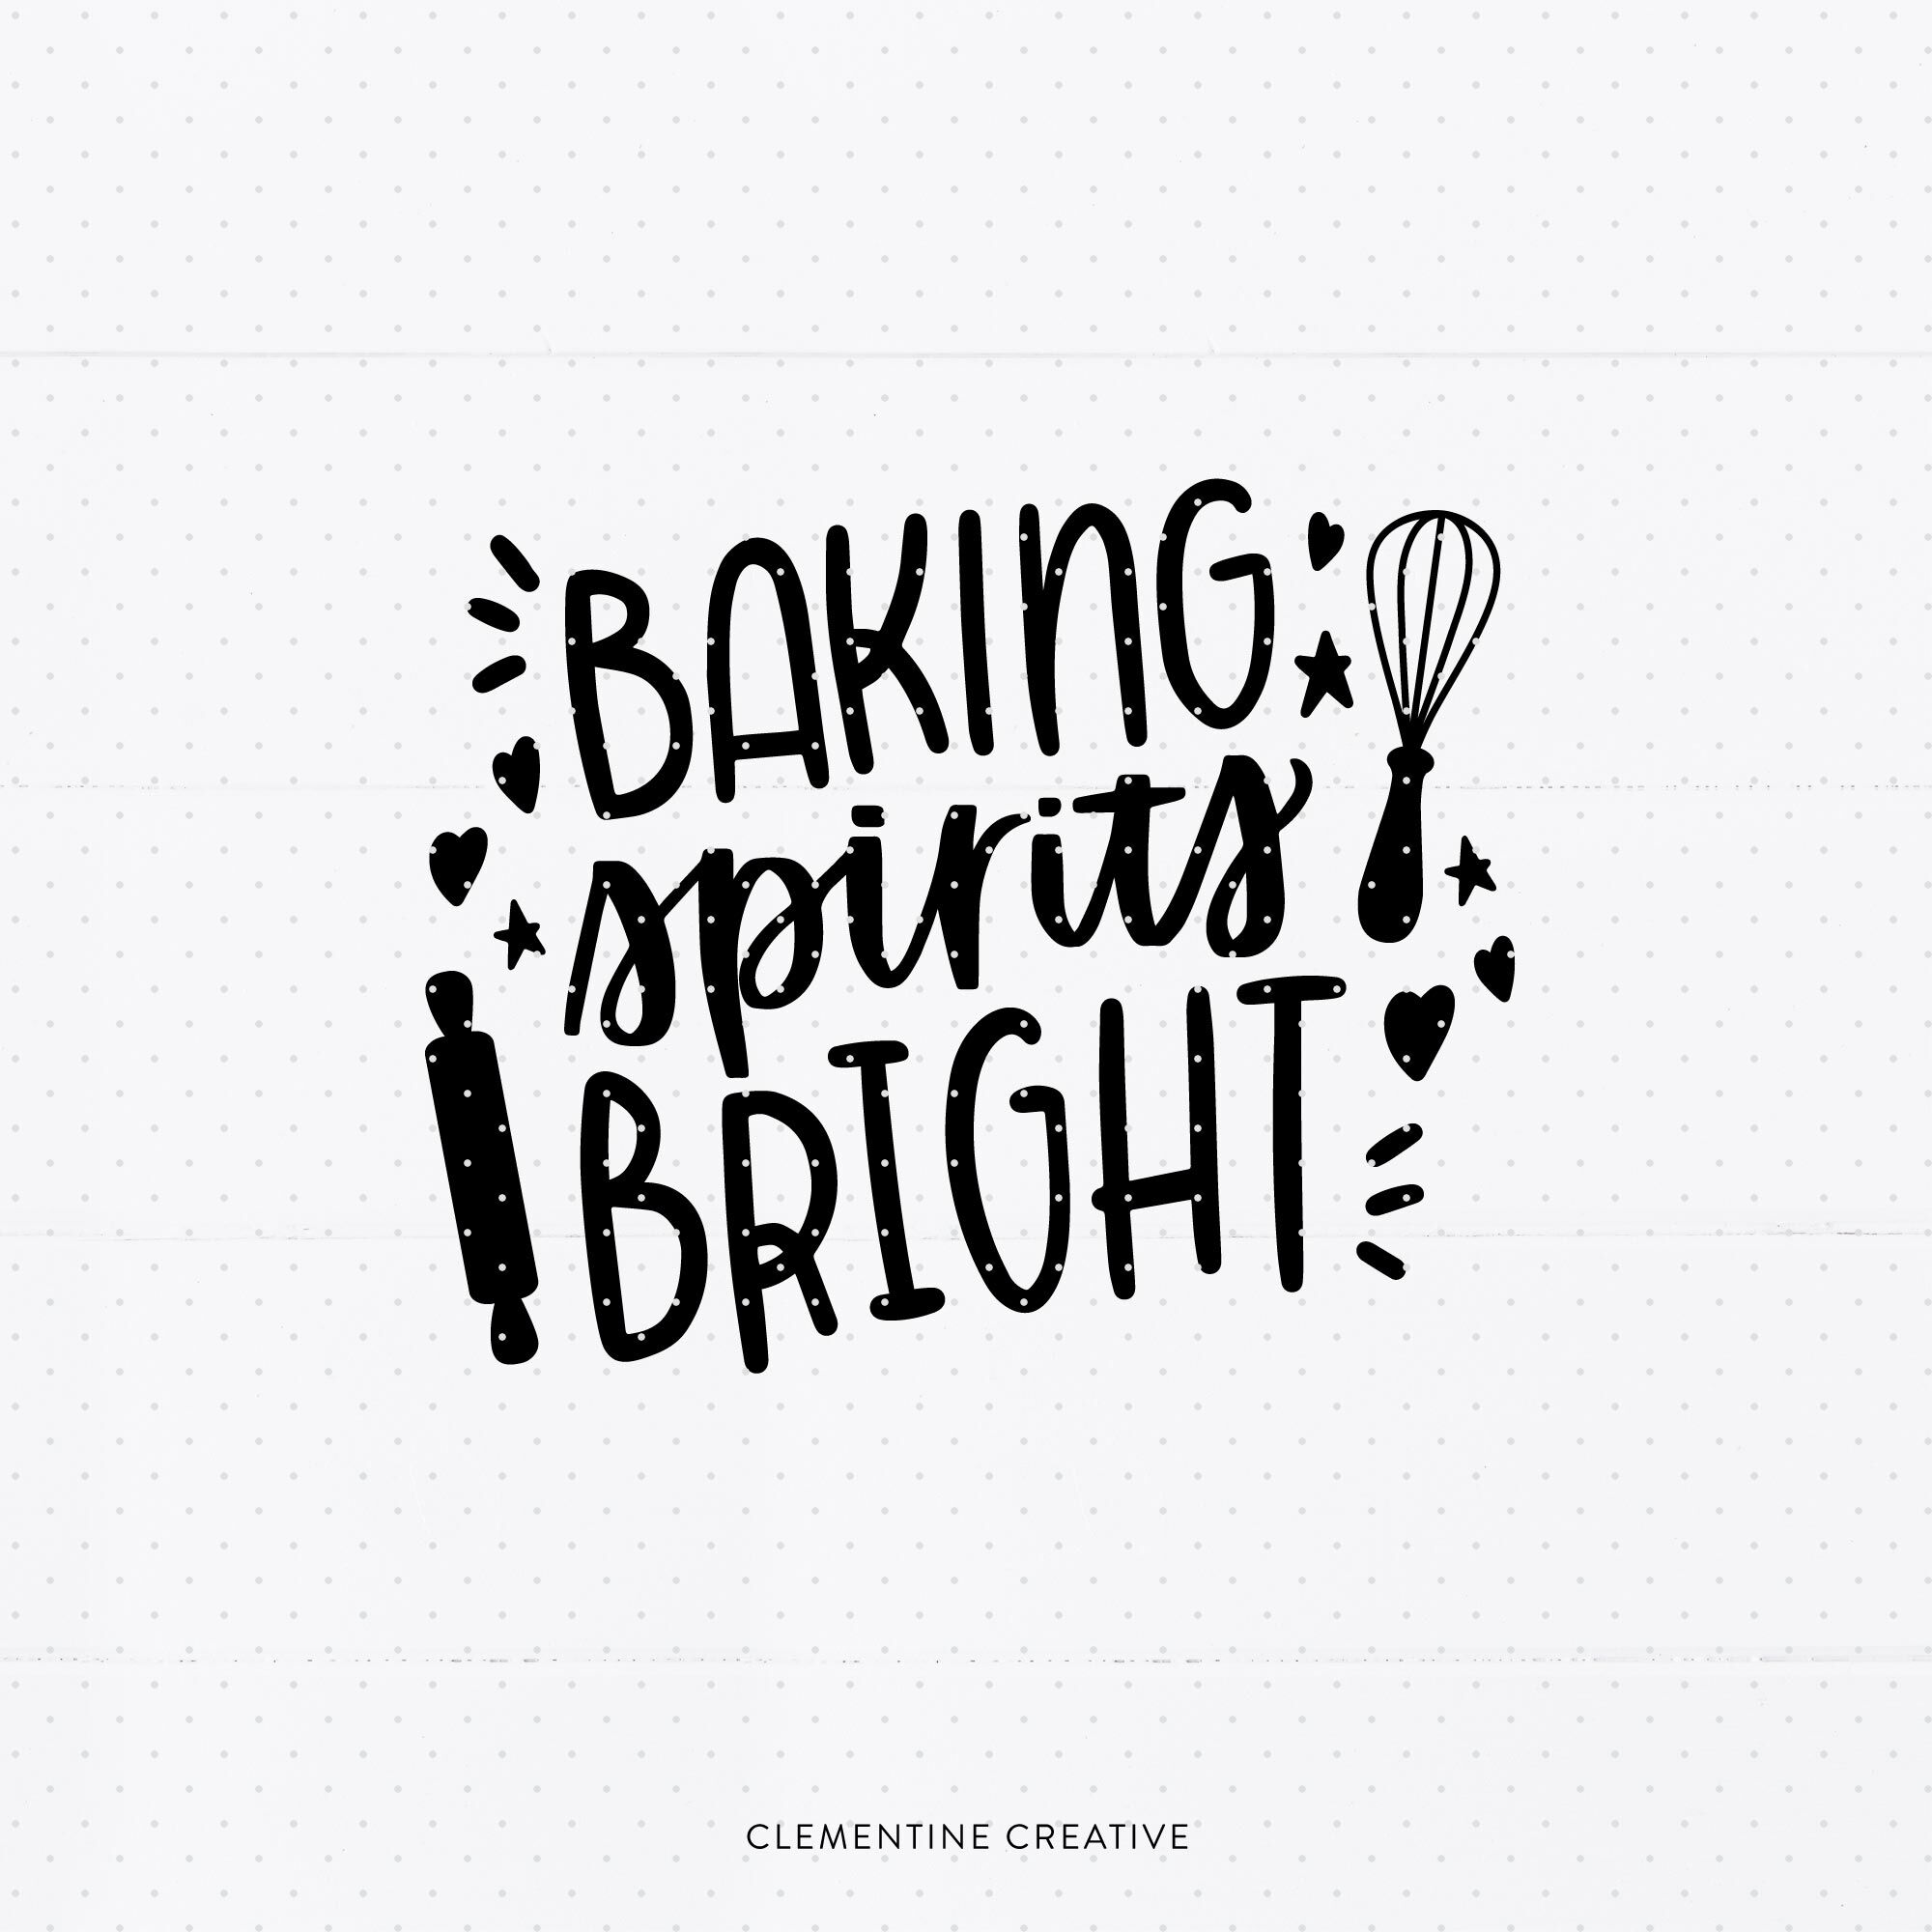 Baking Spirits Bright Svg Christmas Baking Svg Christmas Svg For A By Clementine Creative Thehungryjpeg Com